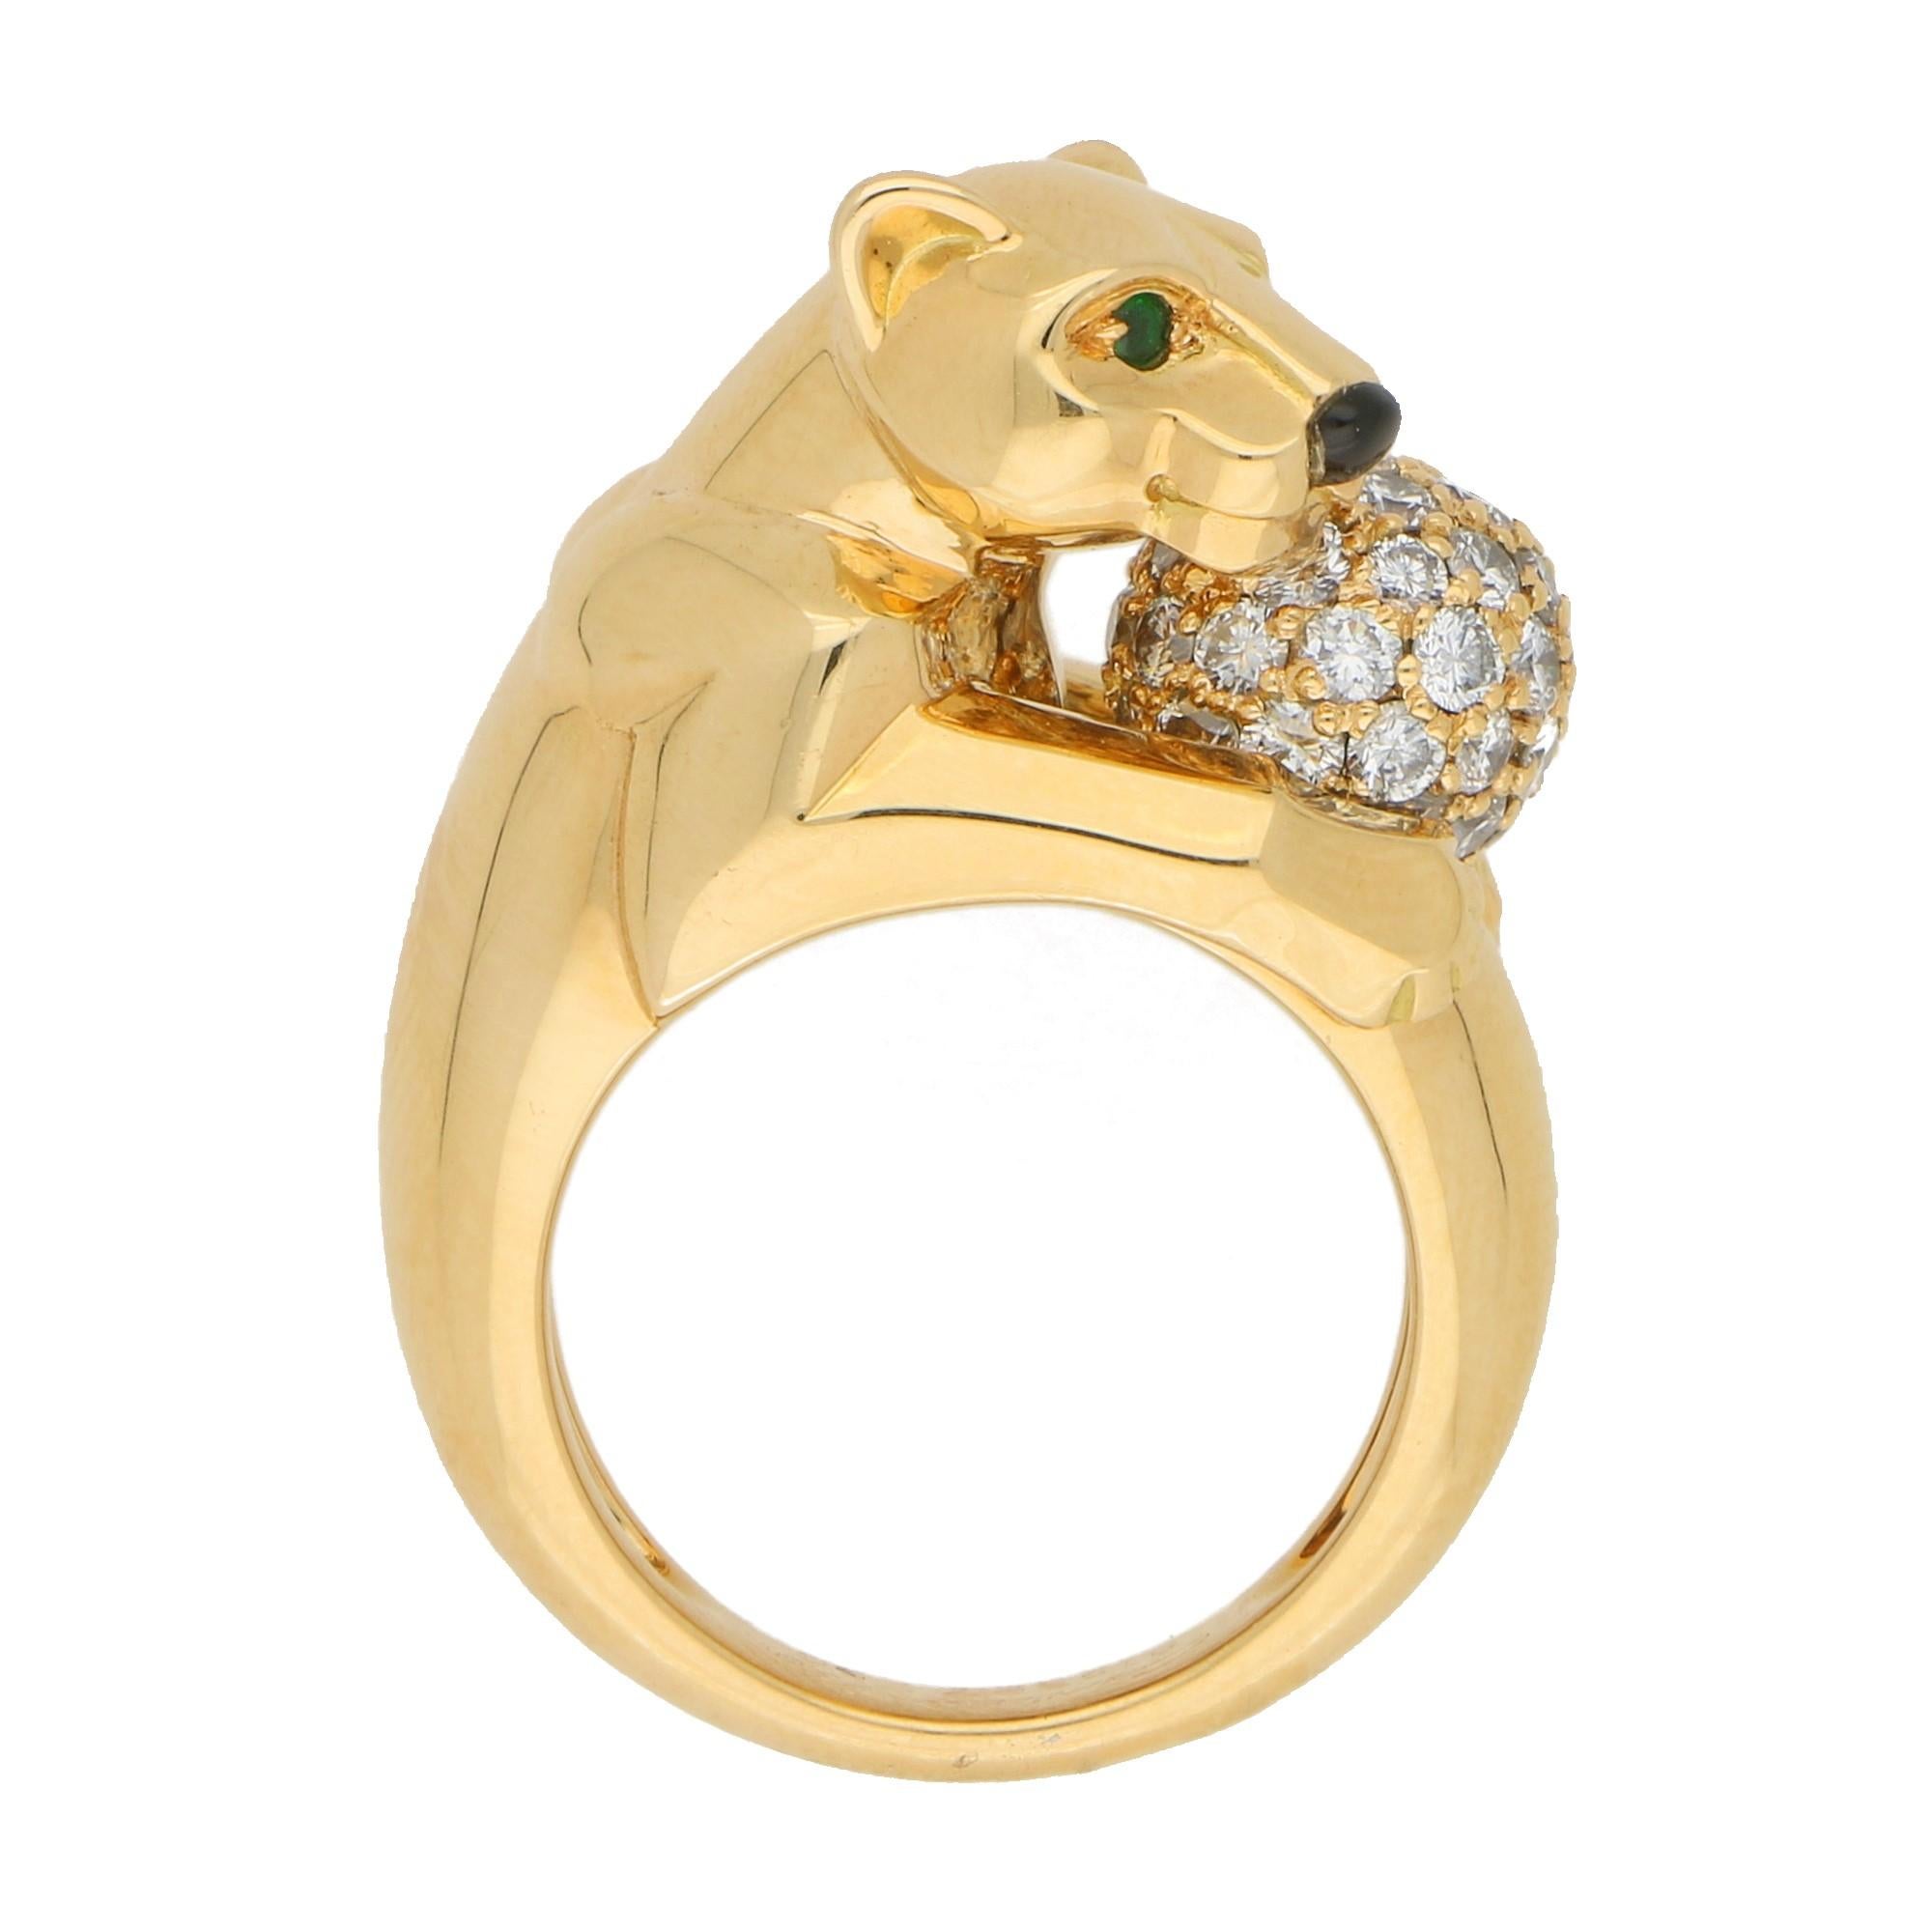 A classic Cartier Panthère ring set in solid 18 carat yellow gold. The ring prominently features a polished panther shaped motif which holds a pave set diamond ball. The panther is set with vibrant emerald green eyes and an onyx nose.

The beauty of